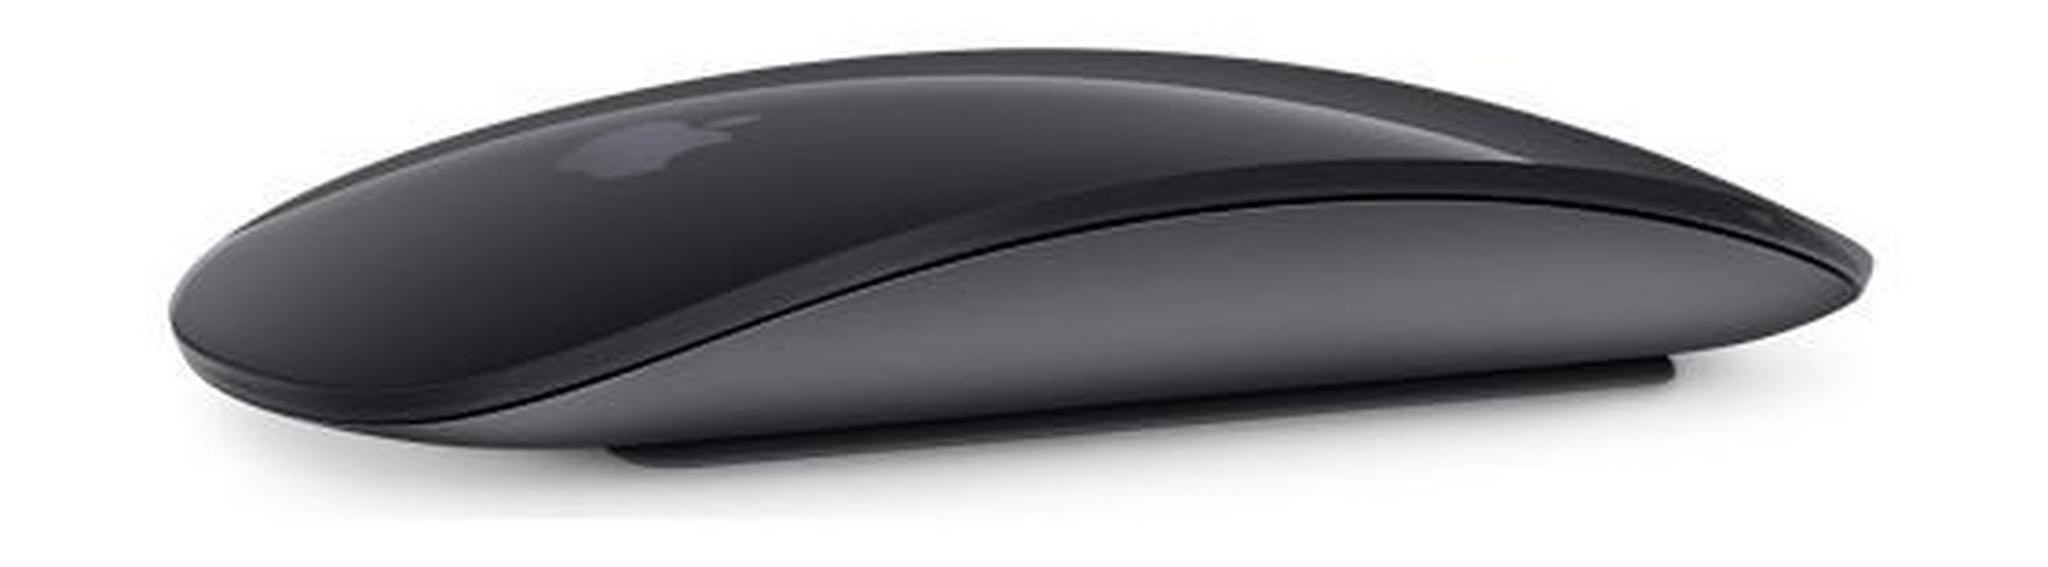 Apple Magic Mouse 2- Space Gray